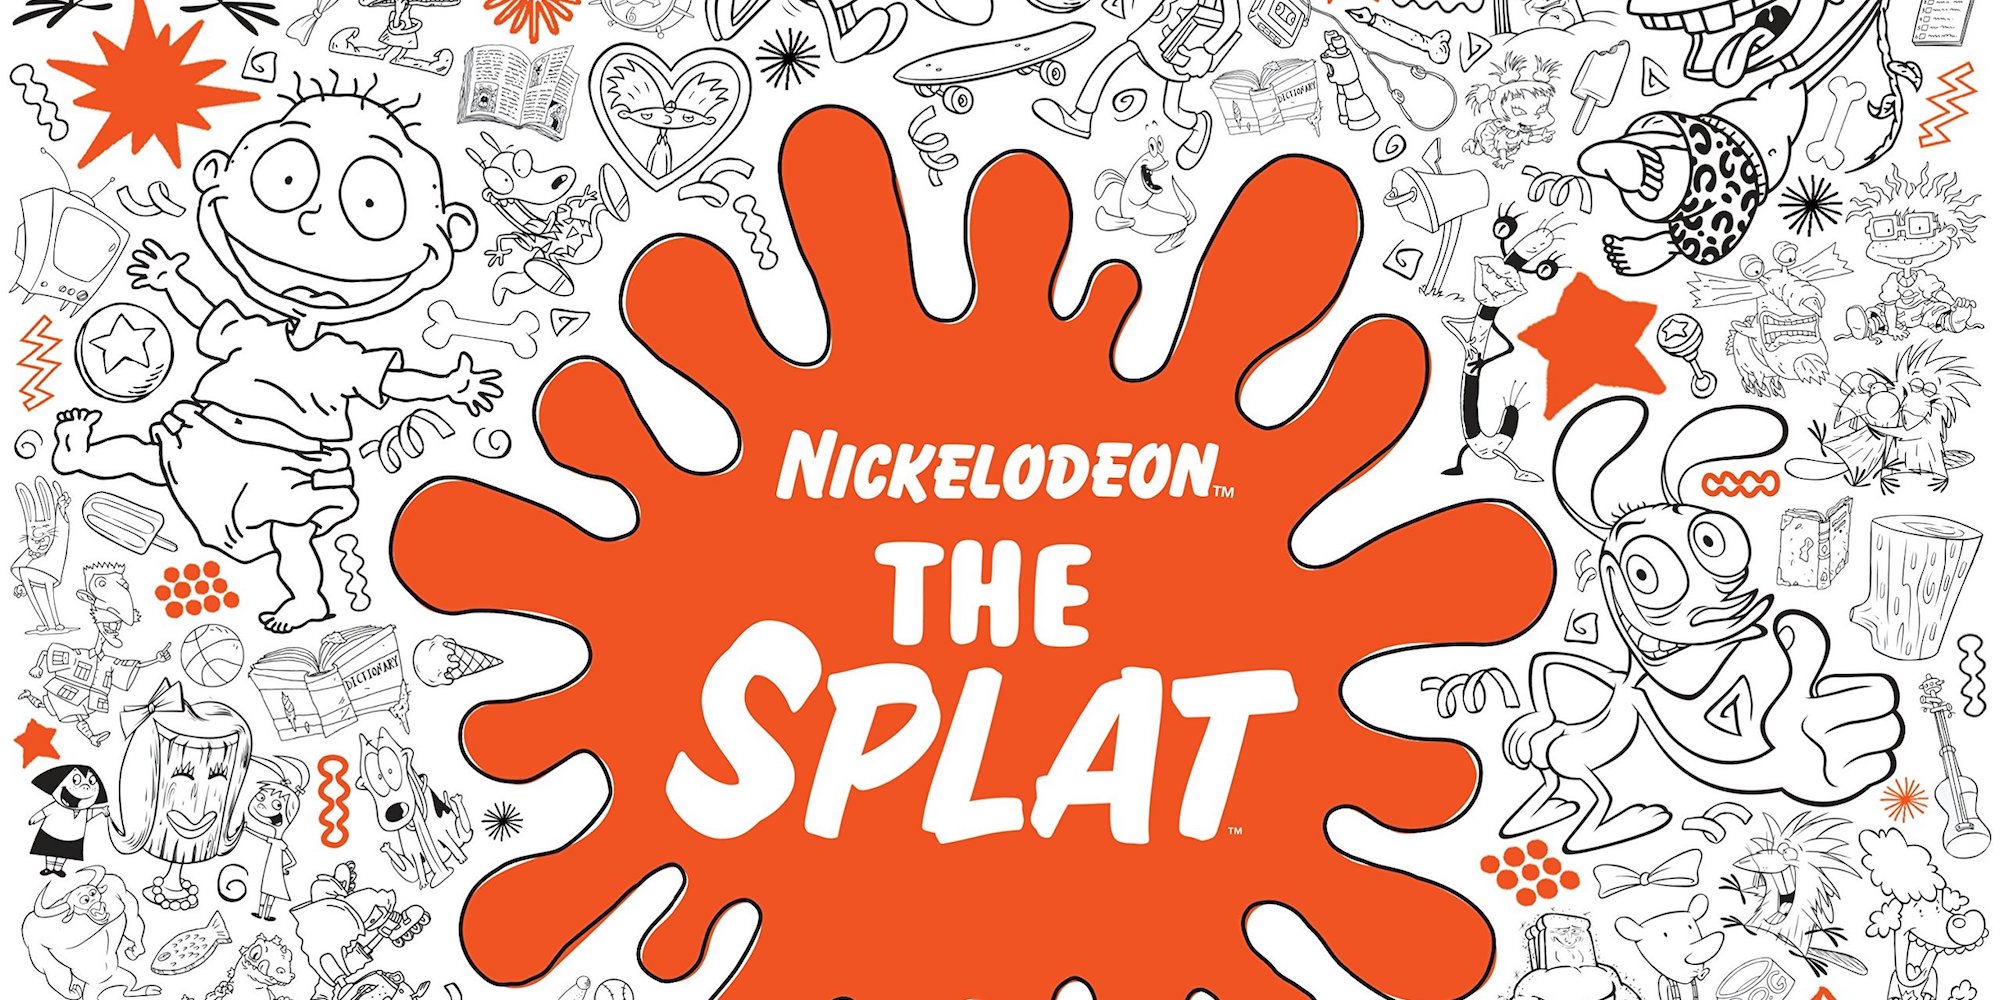 Download Adult coloring books from $5.50: Nickelodeon the '90s ...